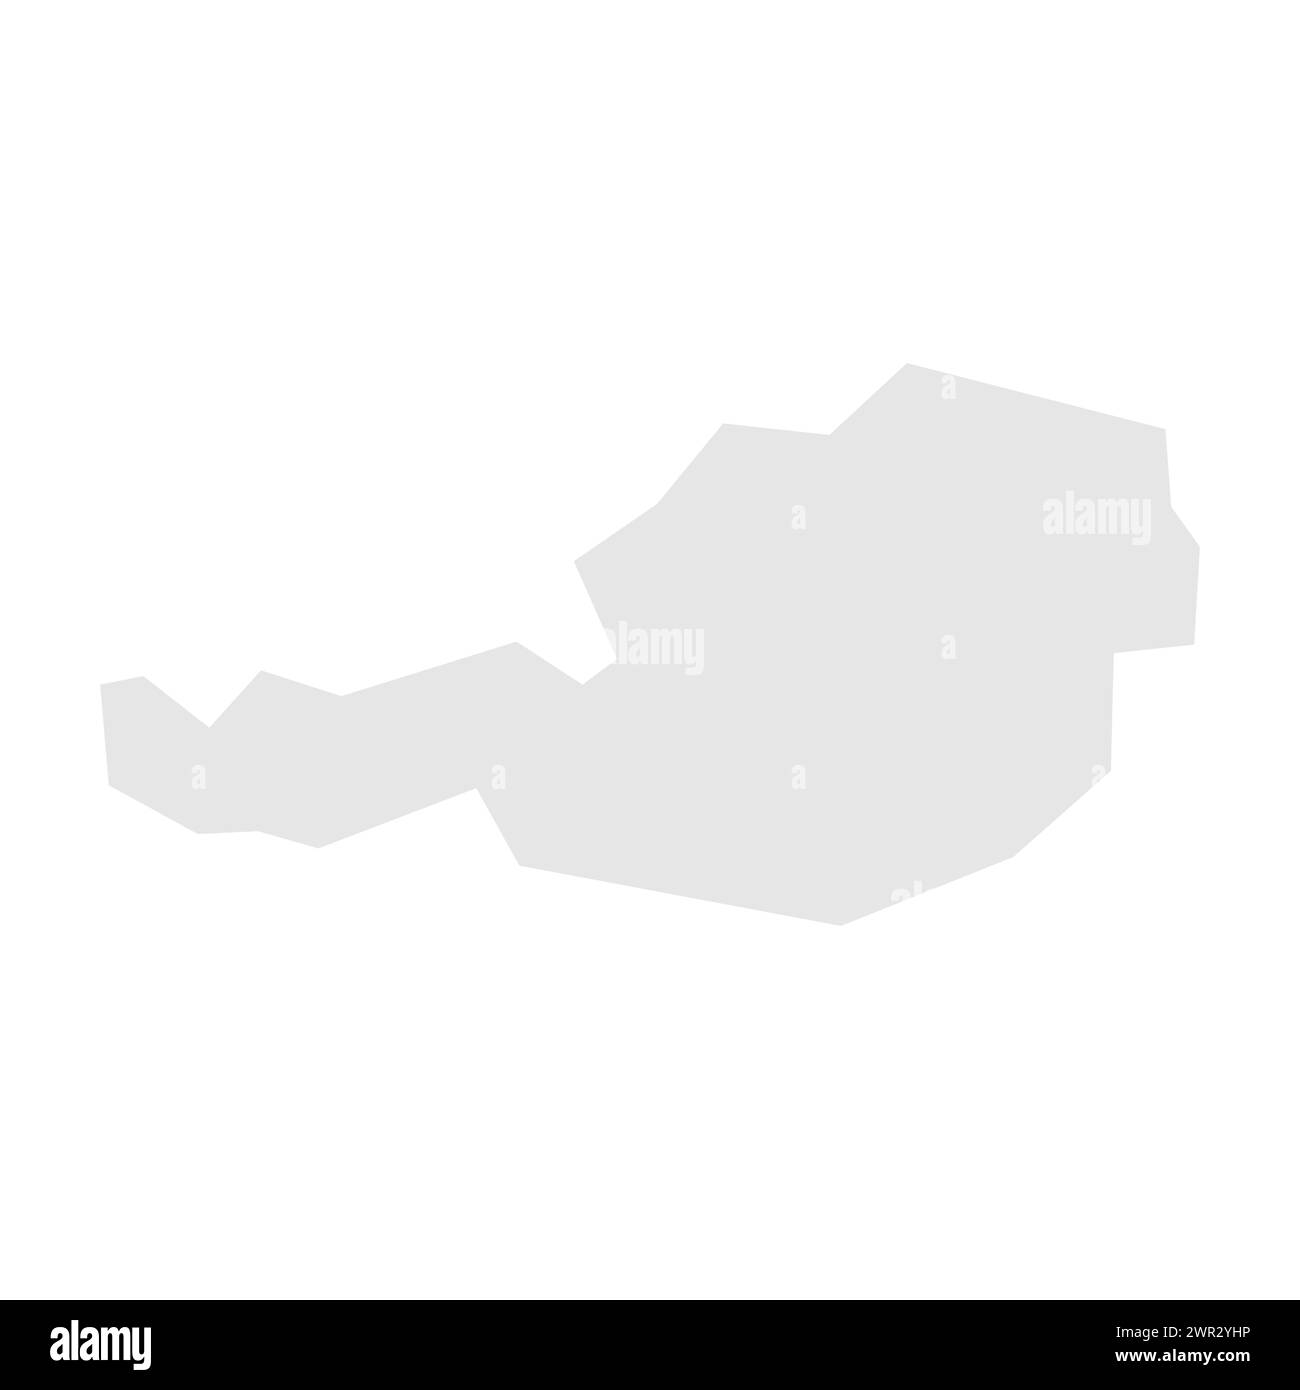 Austria country simplified map. Light grey silhouette with sharp corners isolated on white background. Simple vector icon Stock Vector